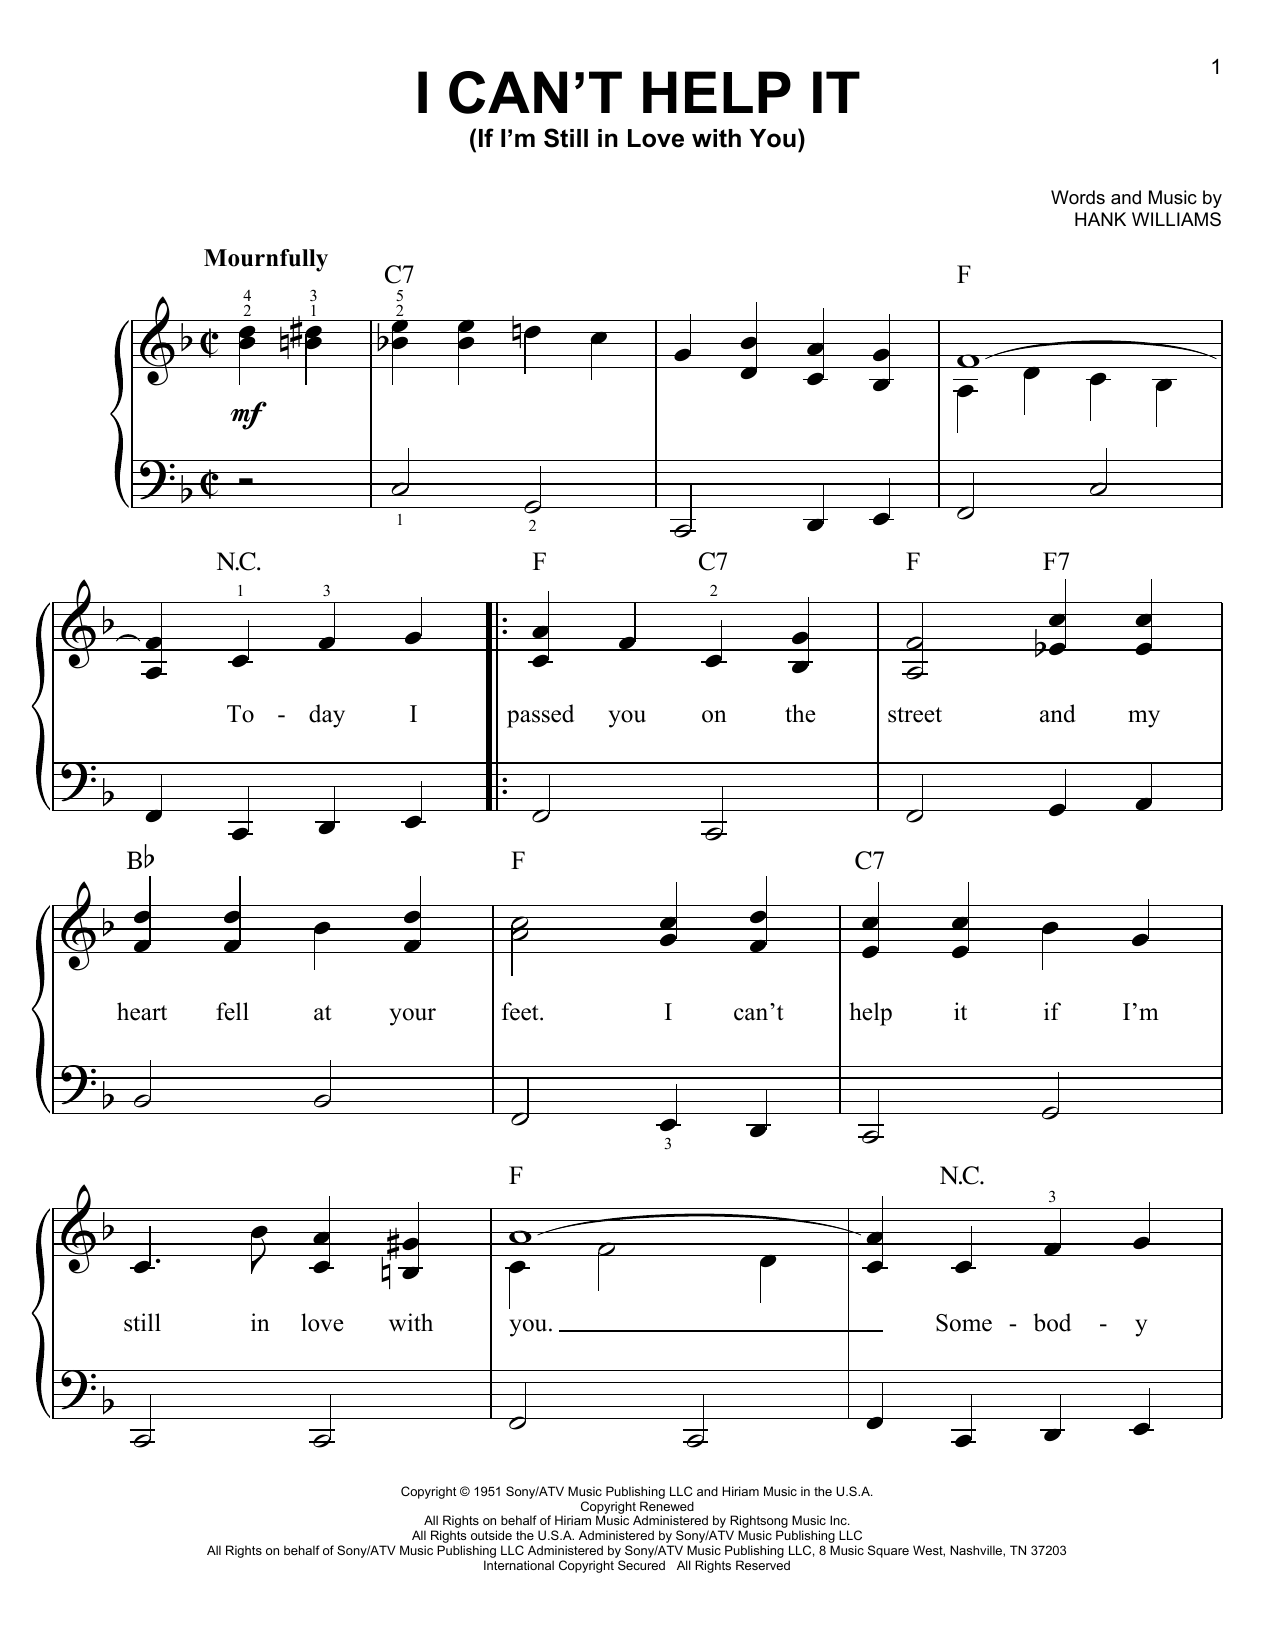 Download Hank Williams I Can't Help It (If I'm Still In Love W Sheet Music